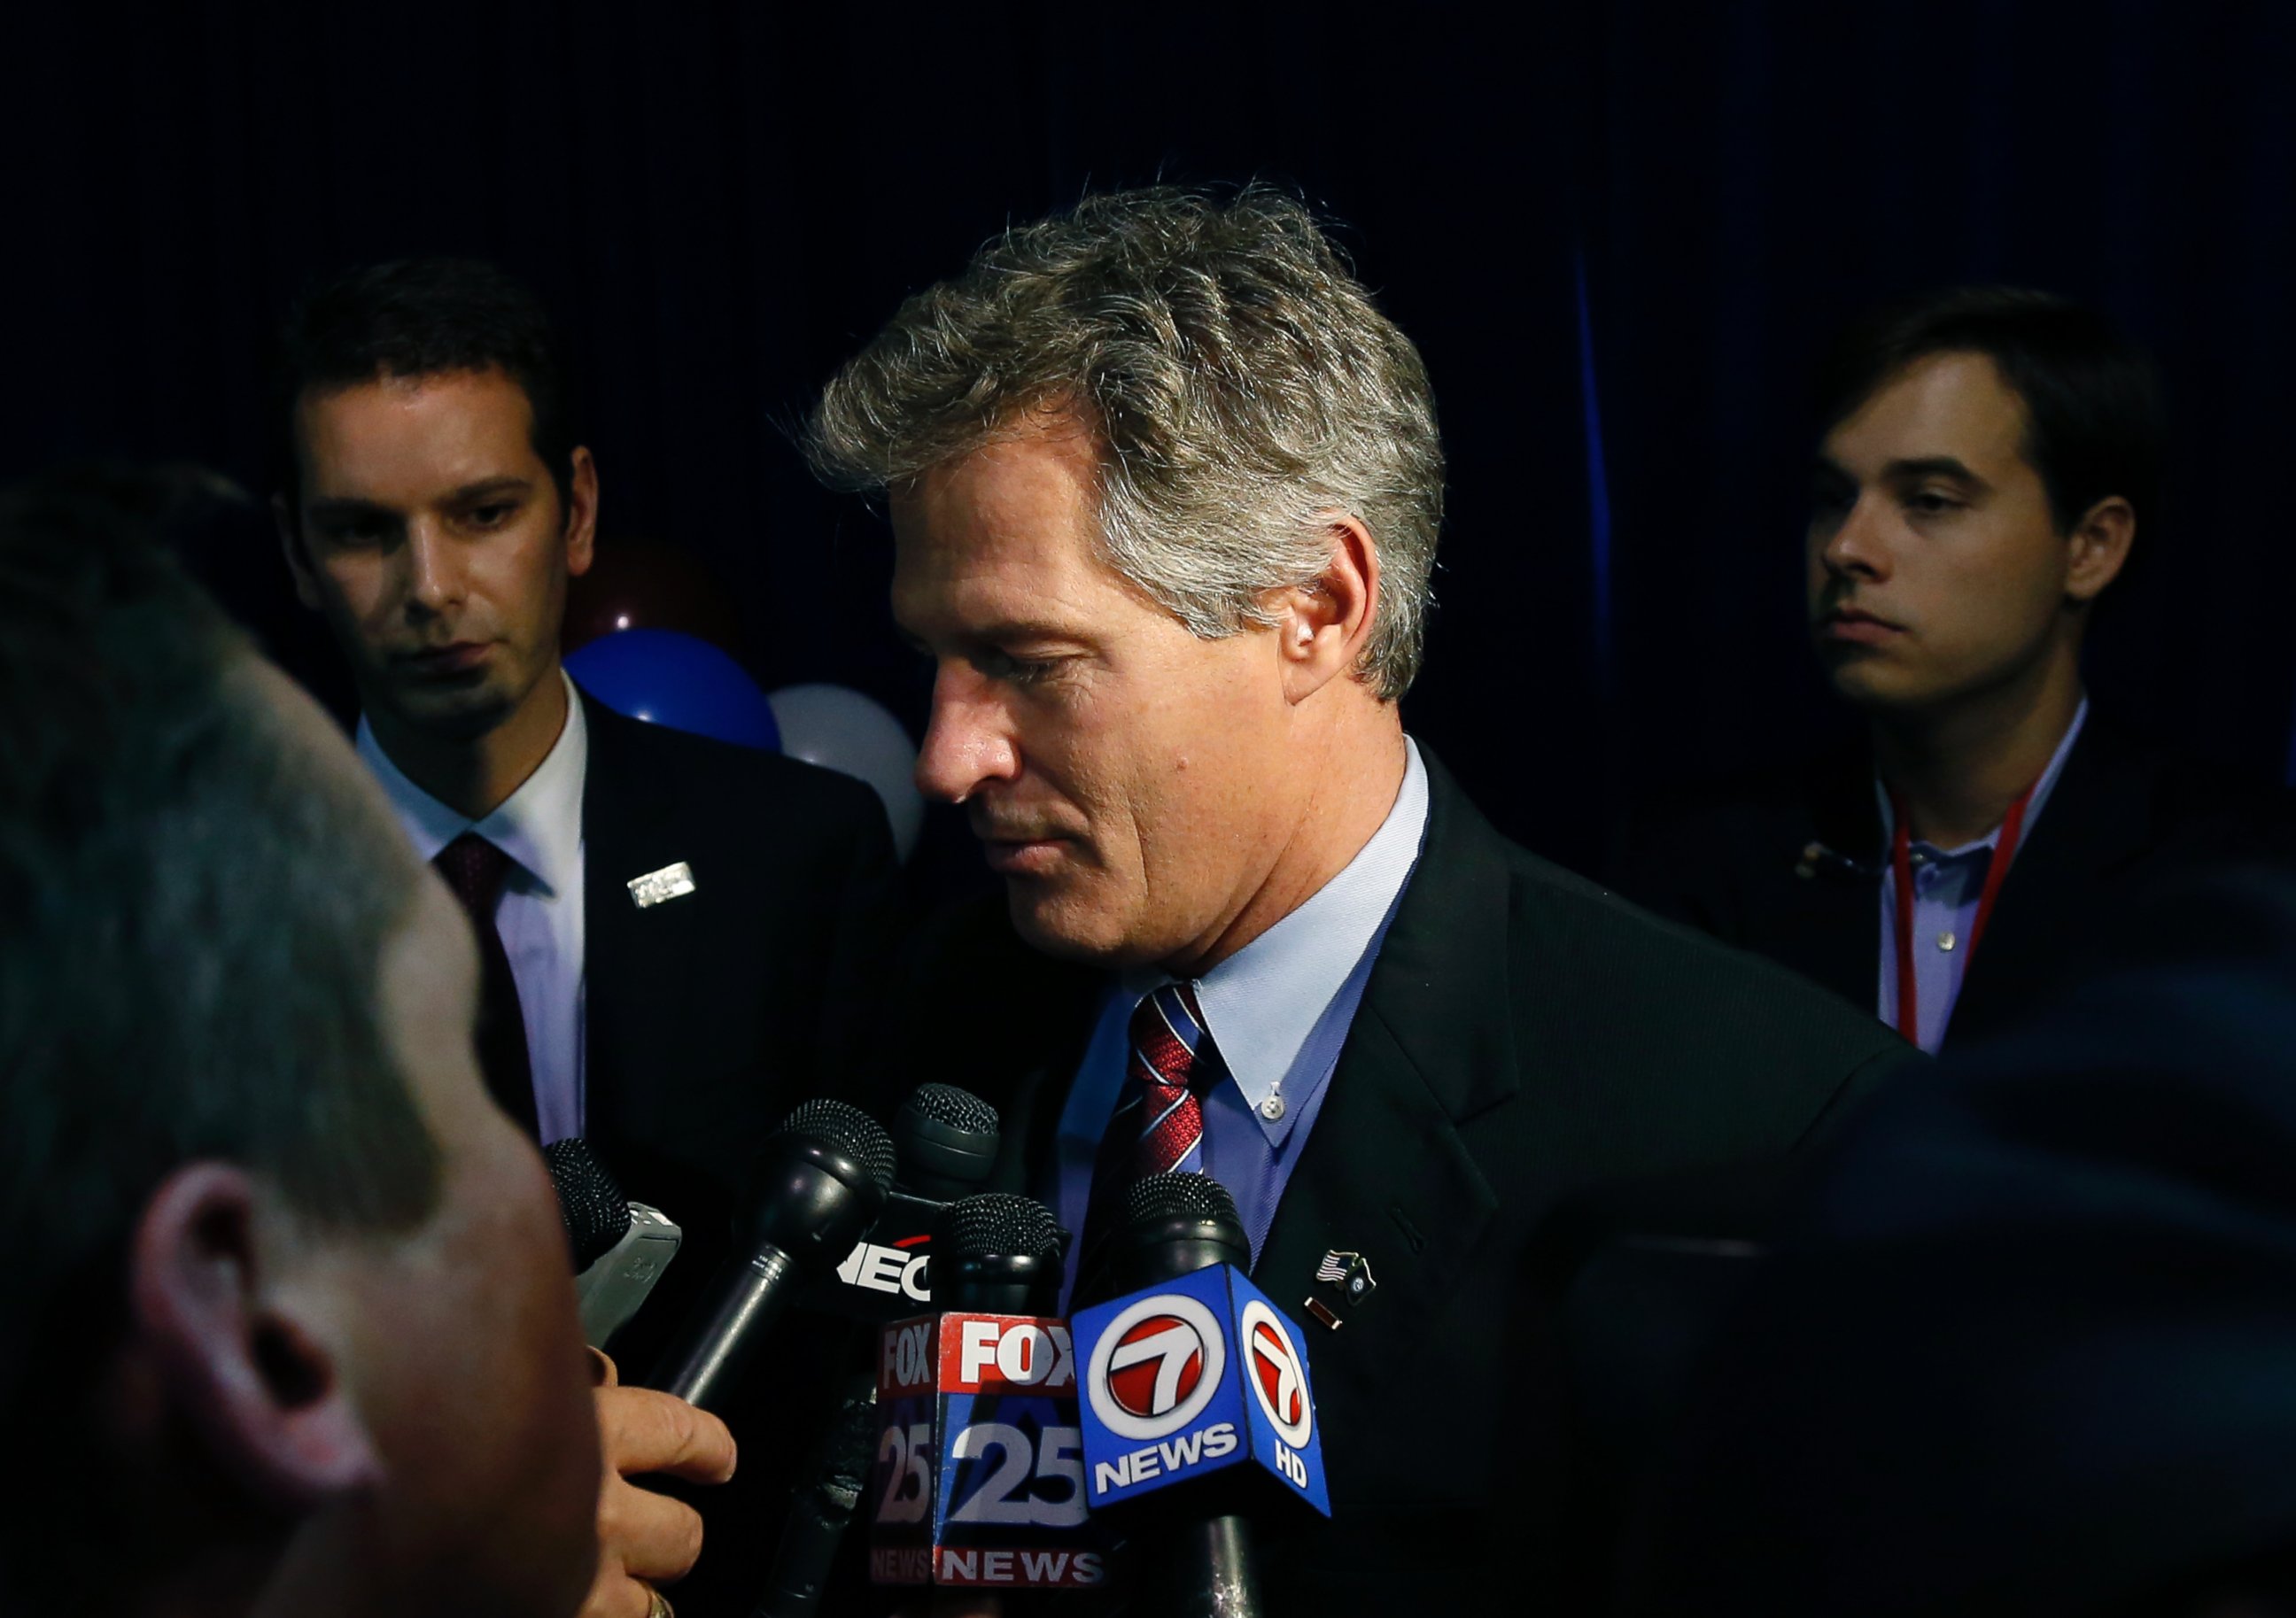 PHOTO: New Hampshire Republican Senate candidate Scott Brown speaks to reporters after conceding defeat to incumbent U.S. Sen. Jeanne Shaheen at his election night party in Manchester, N.H., Nov. 4, 2014.